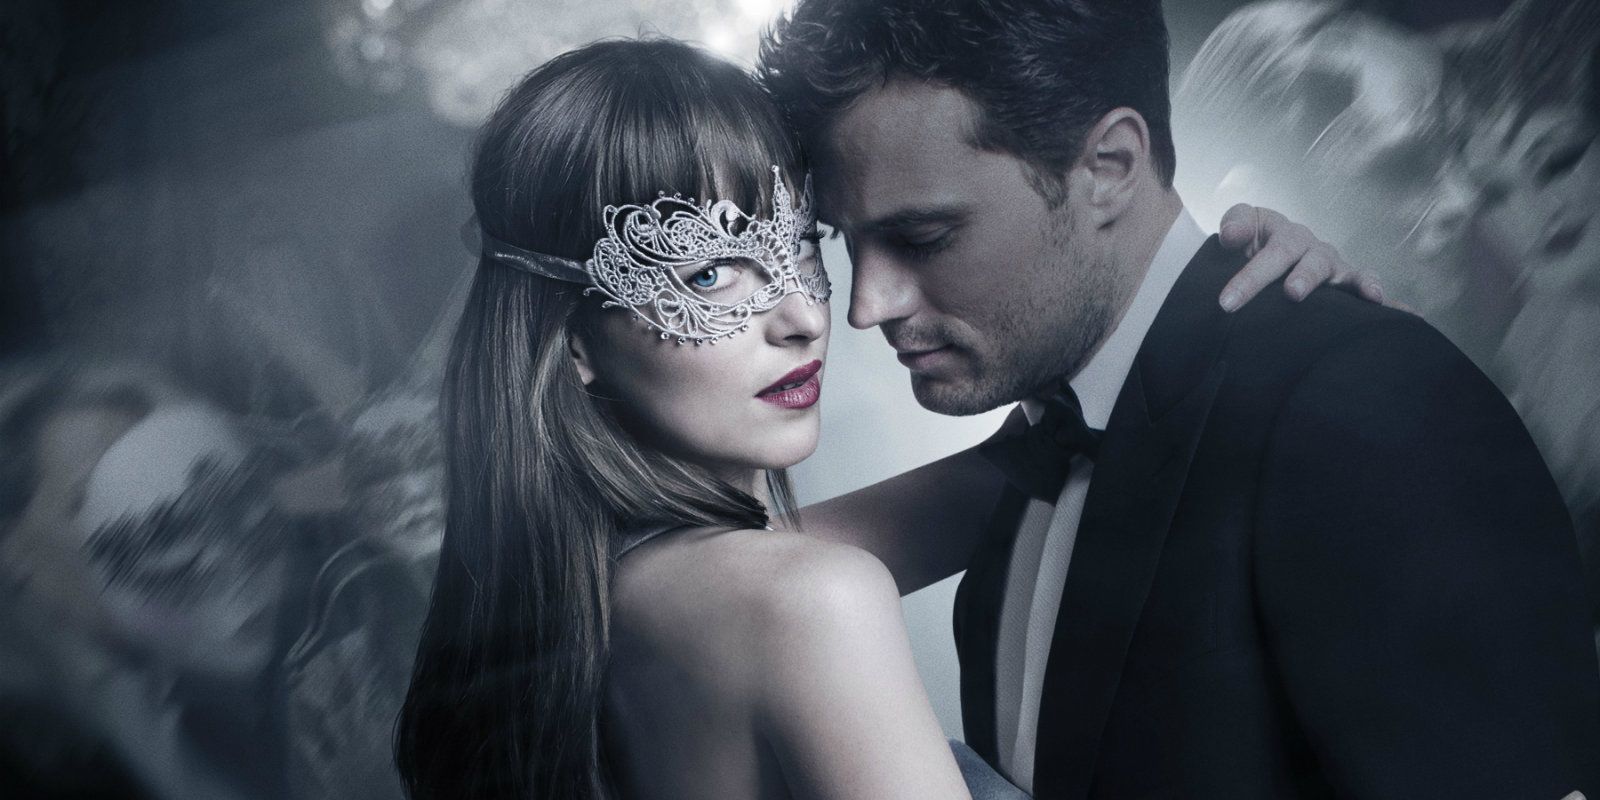 Fifty Shades Darker - poster (cropped)